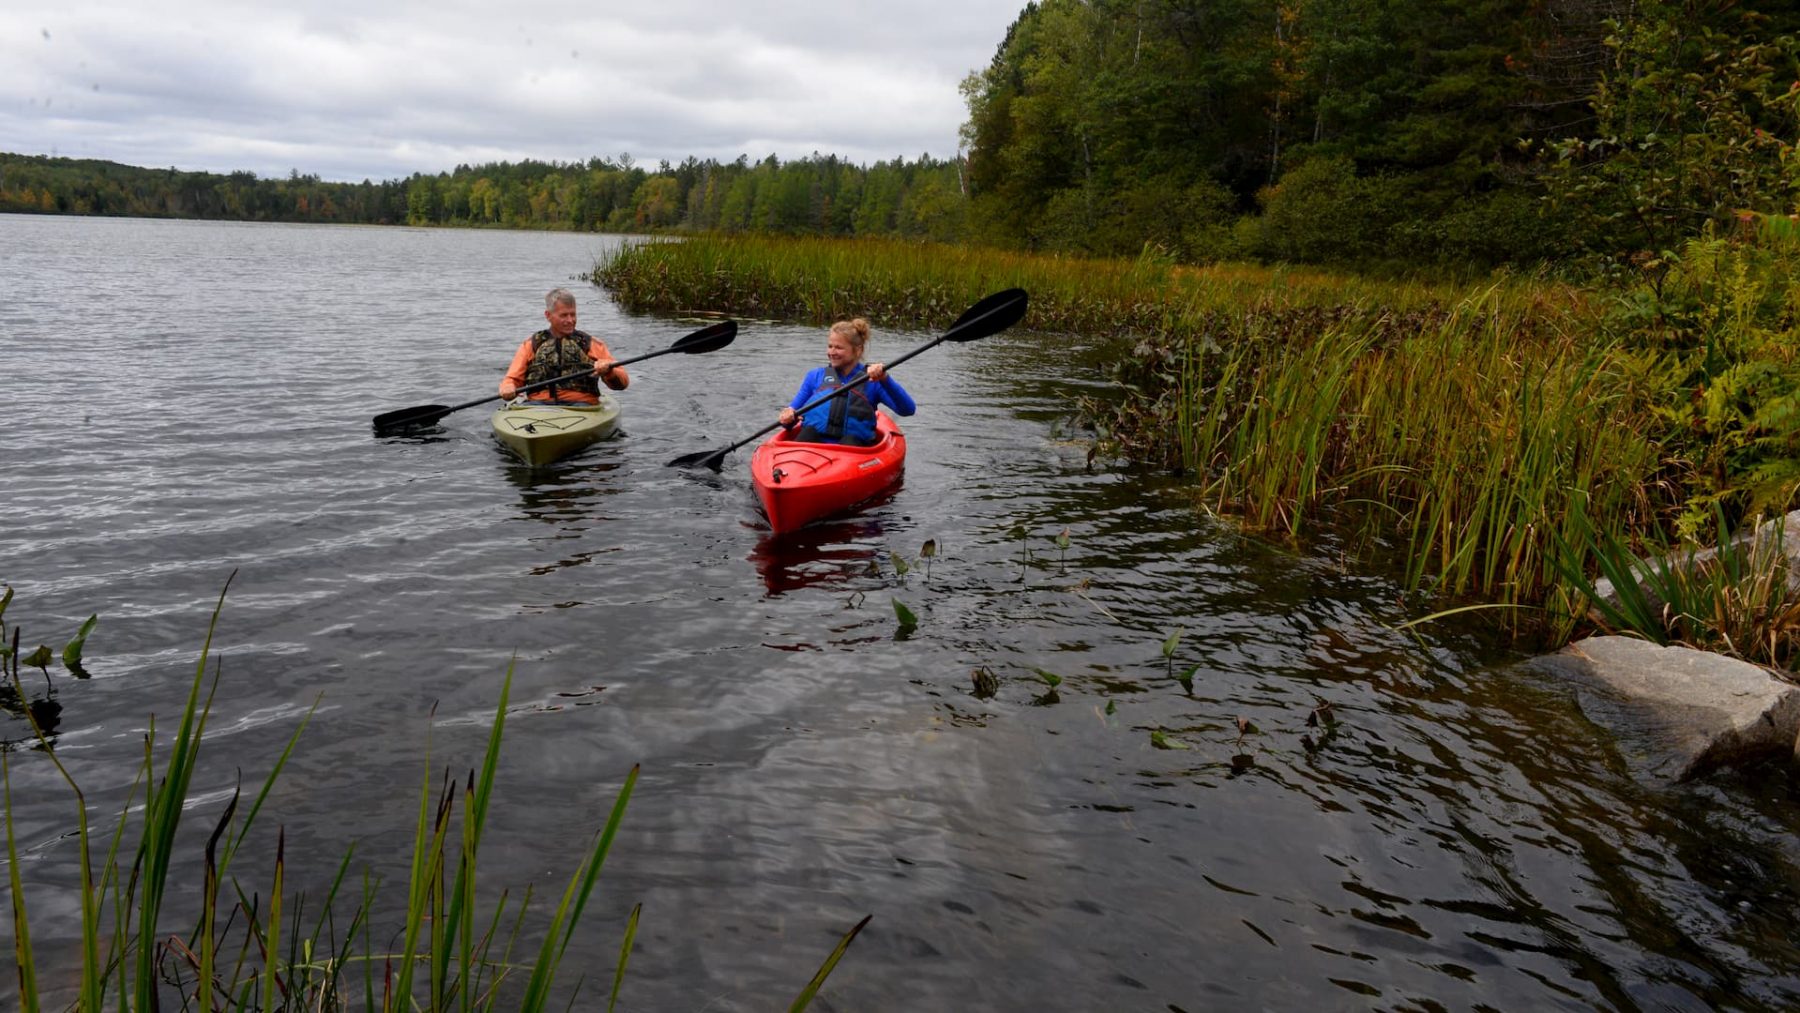 Article: Paddle through stunning fall color in these scenic hotspots | Kayaking on Plum Lake Vilas County Wisconsin